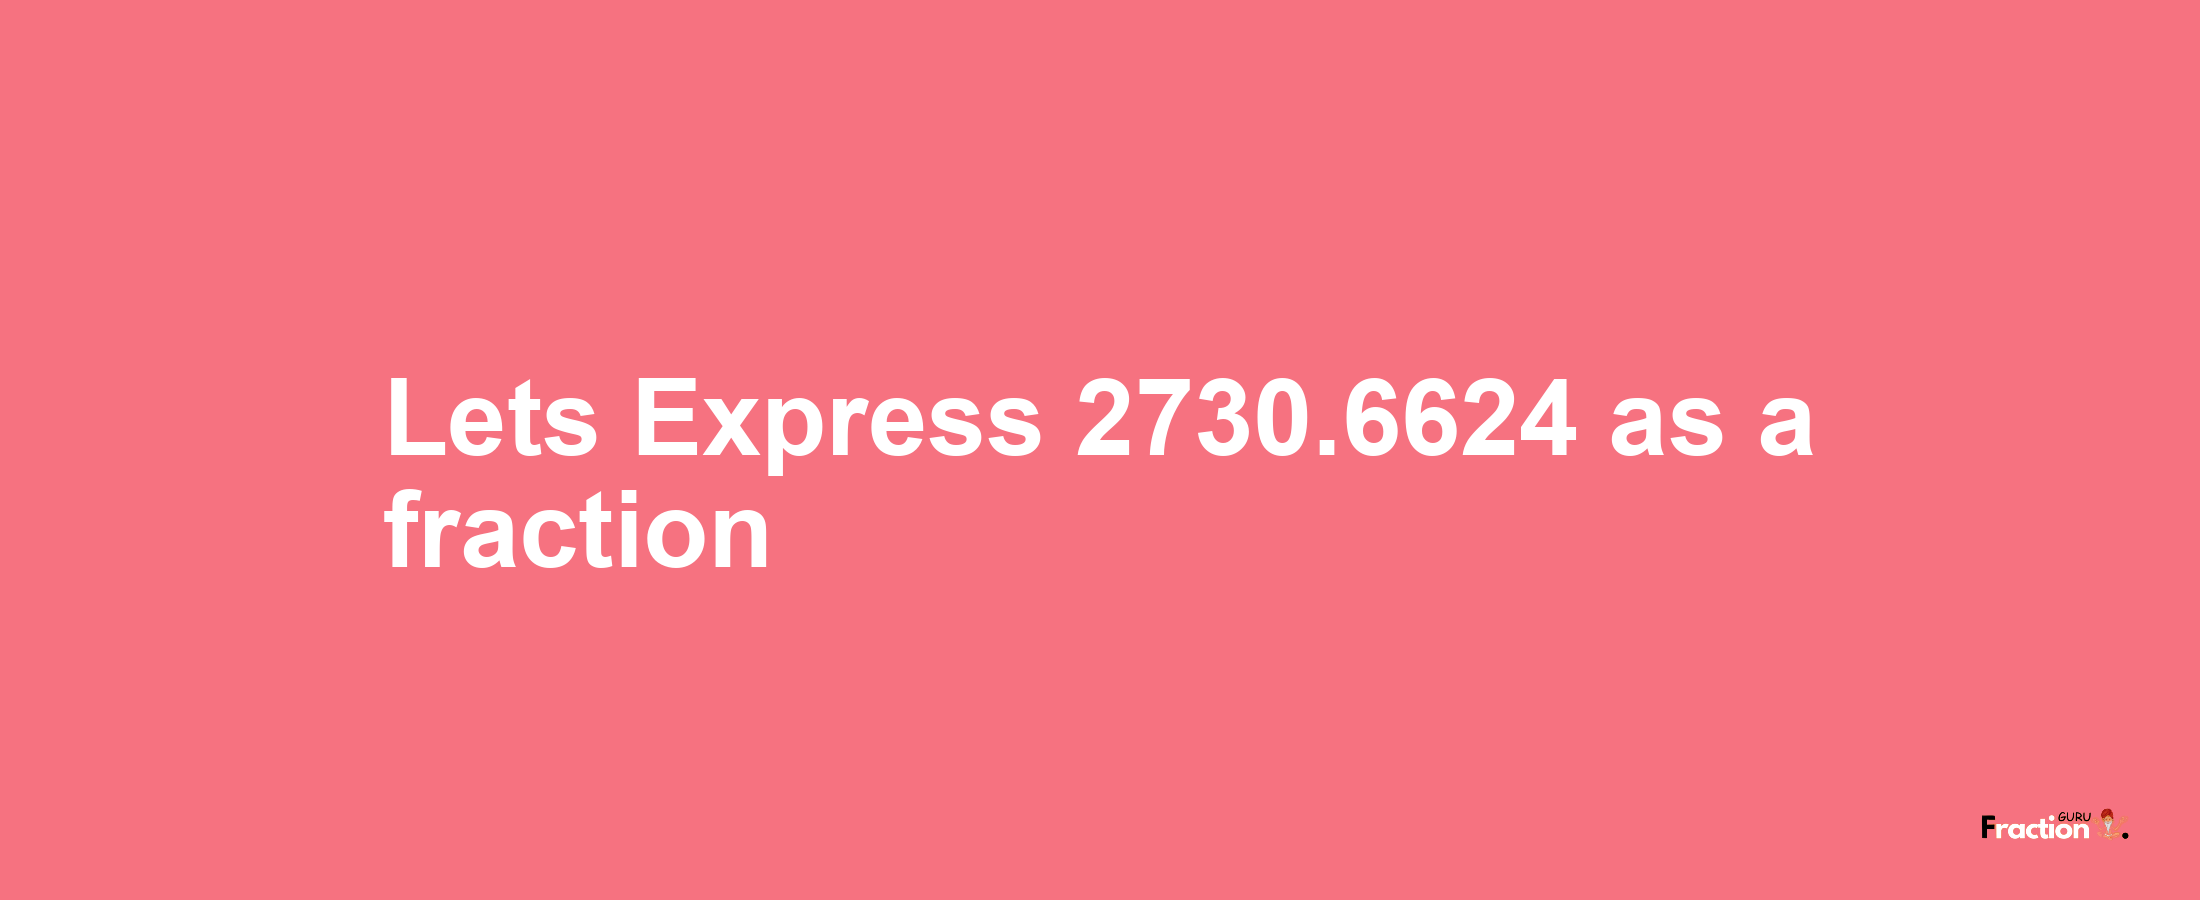 Lets Express 2730.6624 as afraction